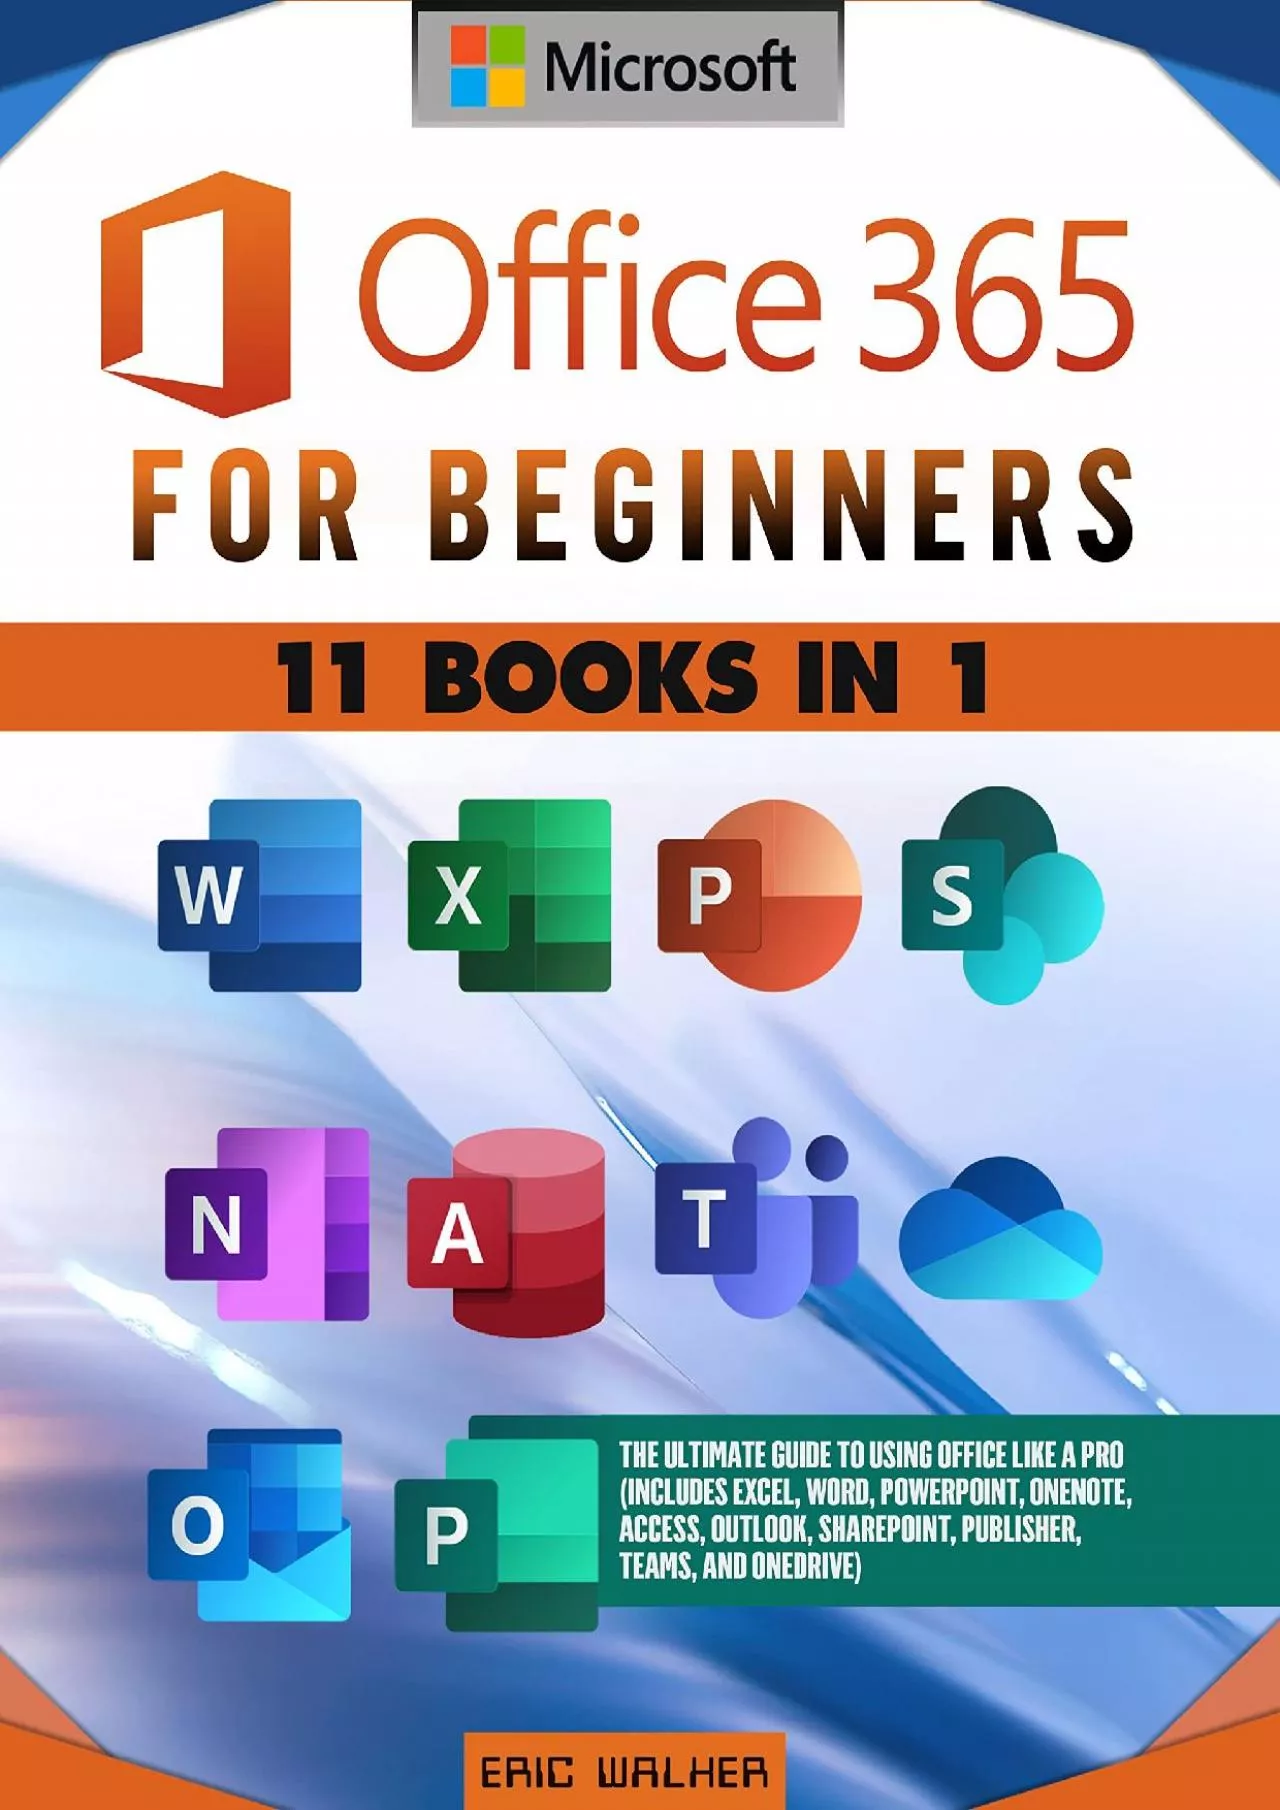 Microsoft Office 365 for Beginners: The Ultimate Guide to Using Office Like a Pro (Includes